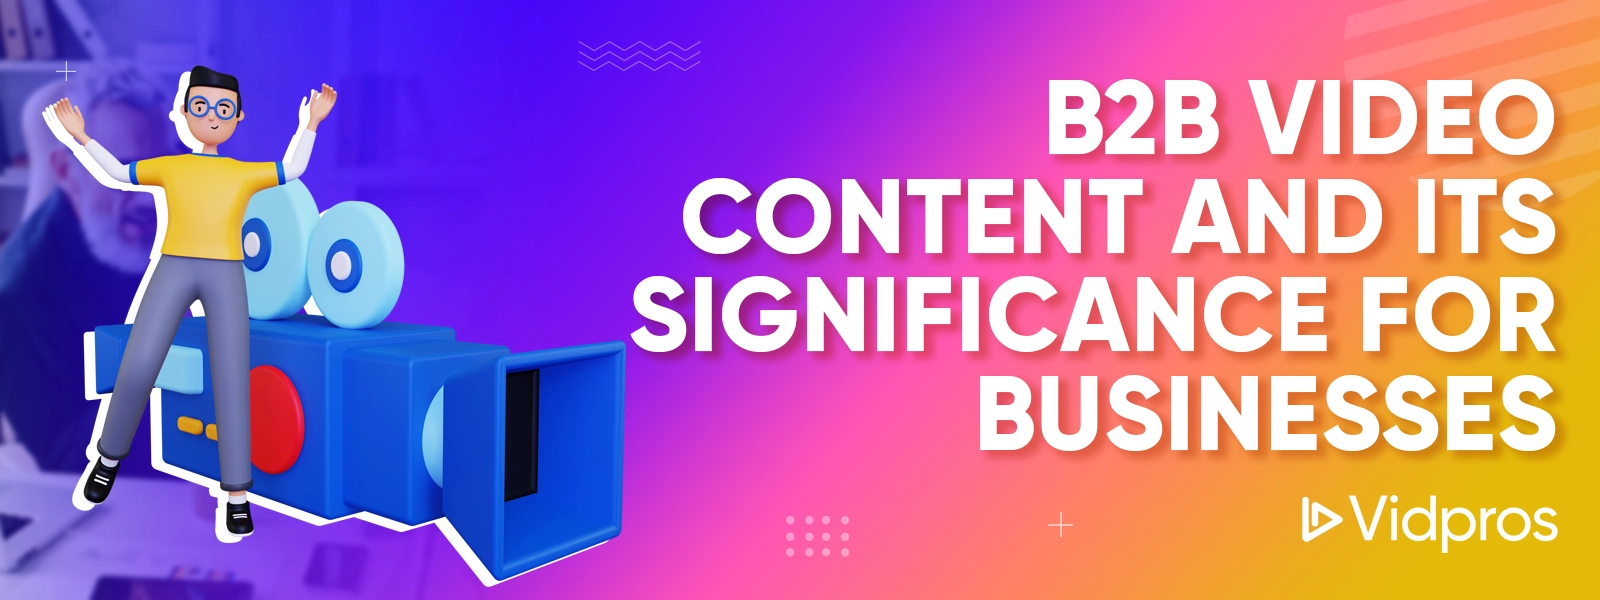 b2b video content significance